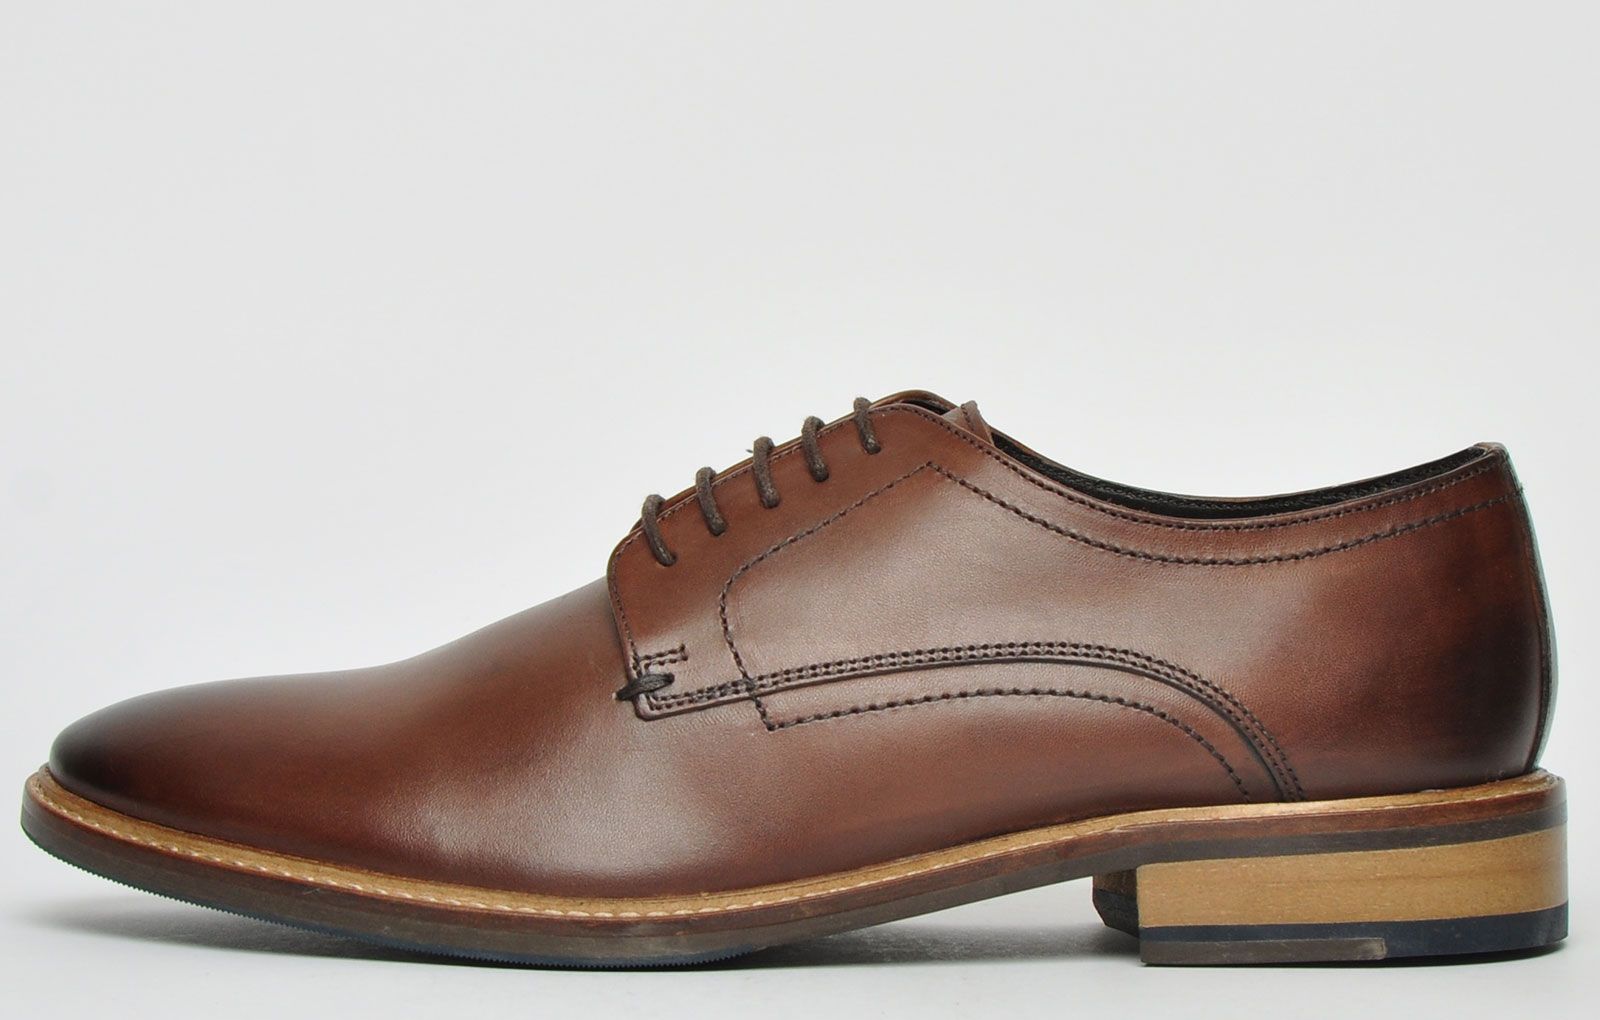 Crafted from quality soft leather in a well sought-after brown colourway, the Conrad has a smooth finish that would upgrade a smart look or add an elegant touch to any smart-casual outfit. <p>These Ikon Conrad men’s premium leather shoes feature a full lace up front, combined with a premium leather textile inner lining, providing a comfortable and secure fit throughout all wear. The durable outsole with stitch detailing provides fashionable retro styling making these Conrad shoes an absolute fashion must have<b>.</b></p> <p><b> </b></p> <p style=